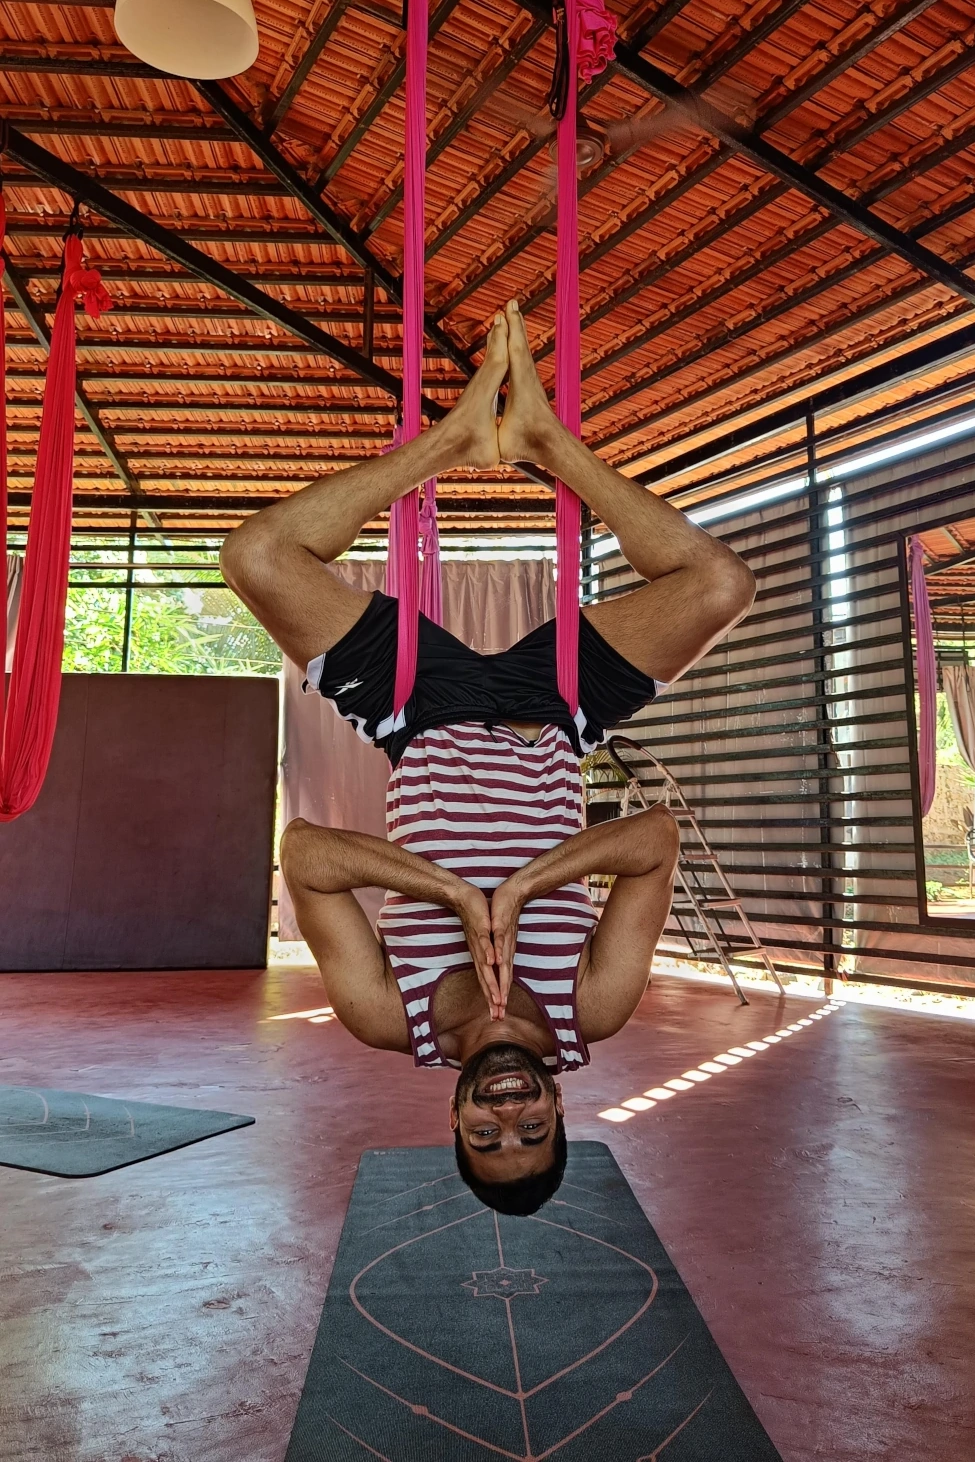 Aerial Yoga: Benefits, What It Is, and How to Get Started